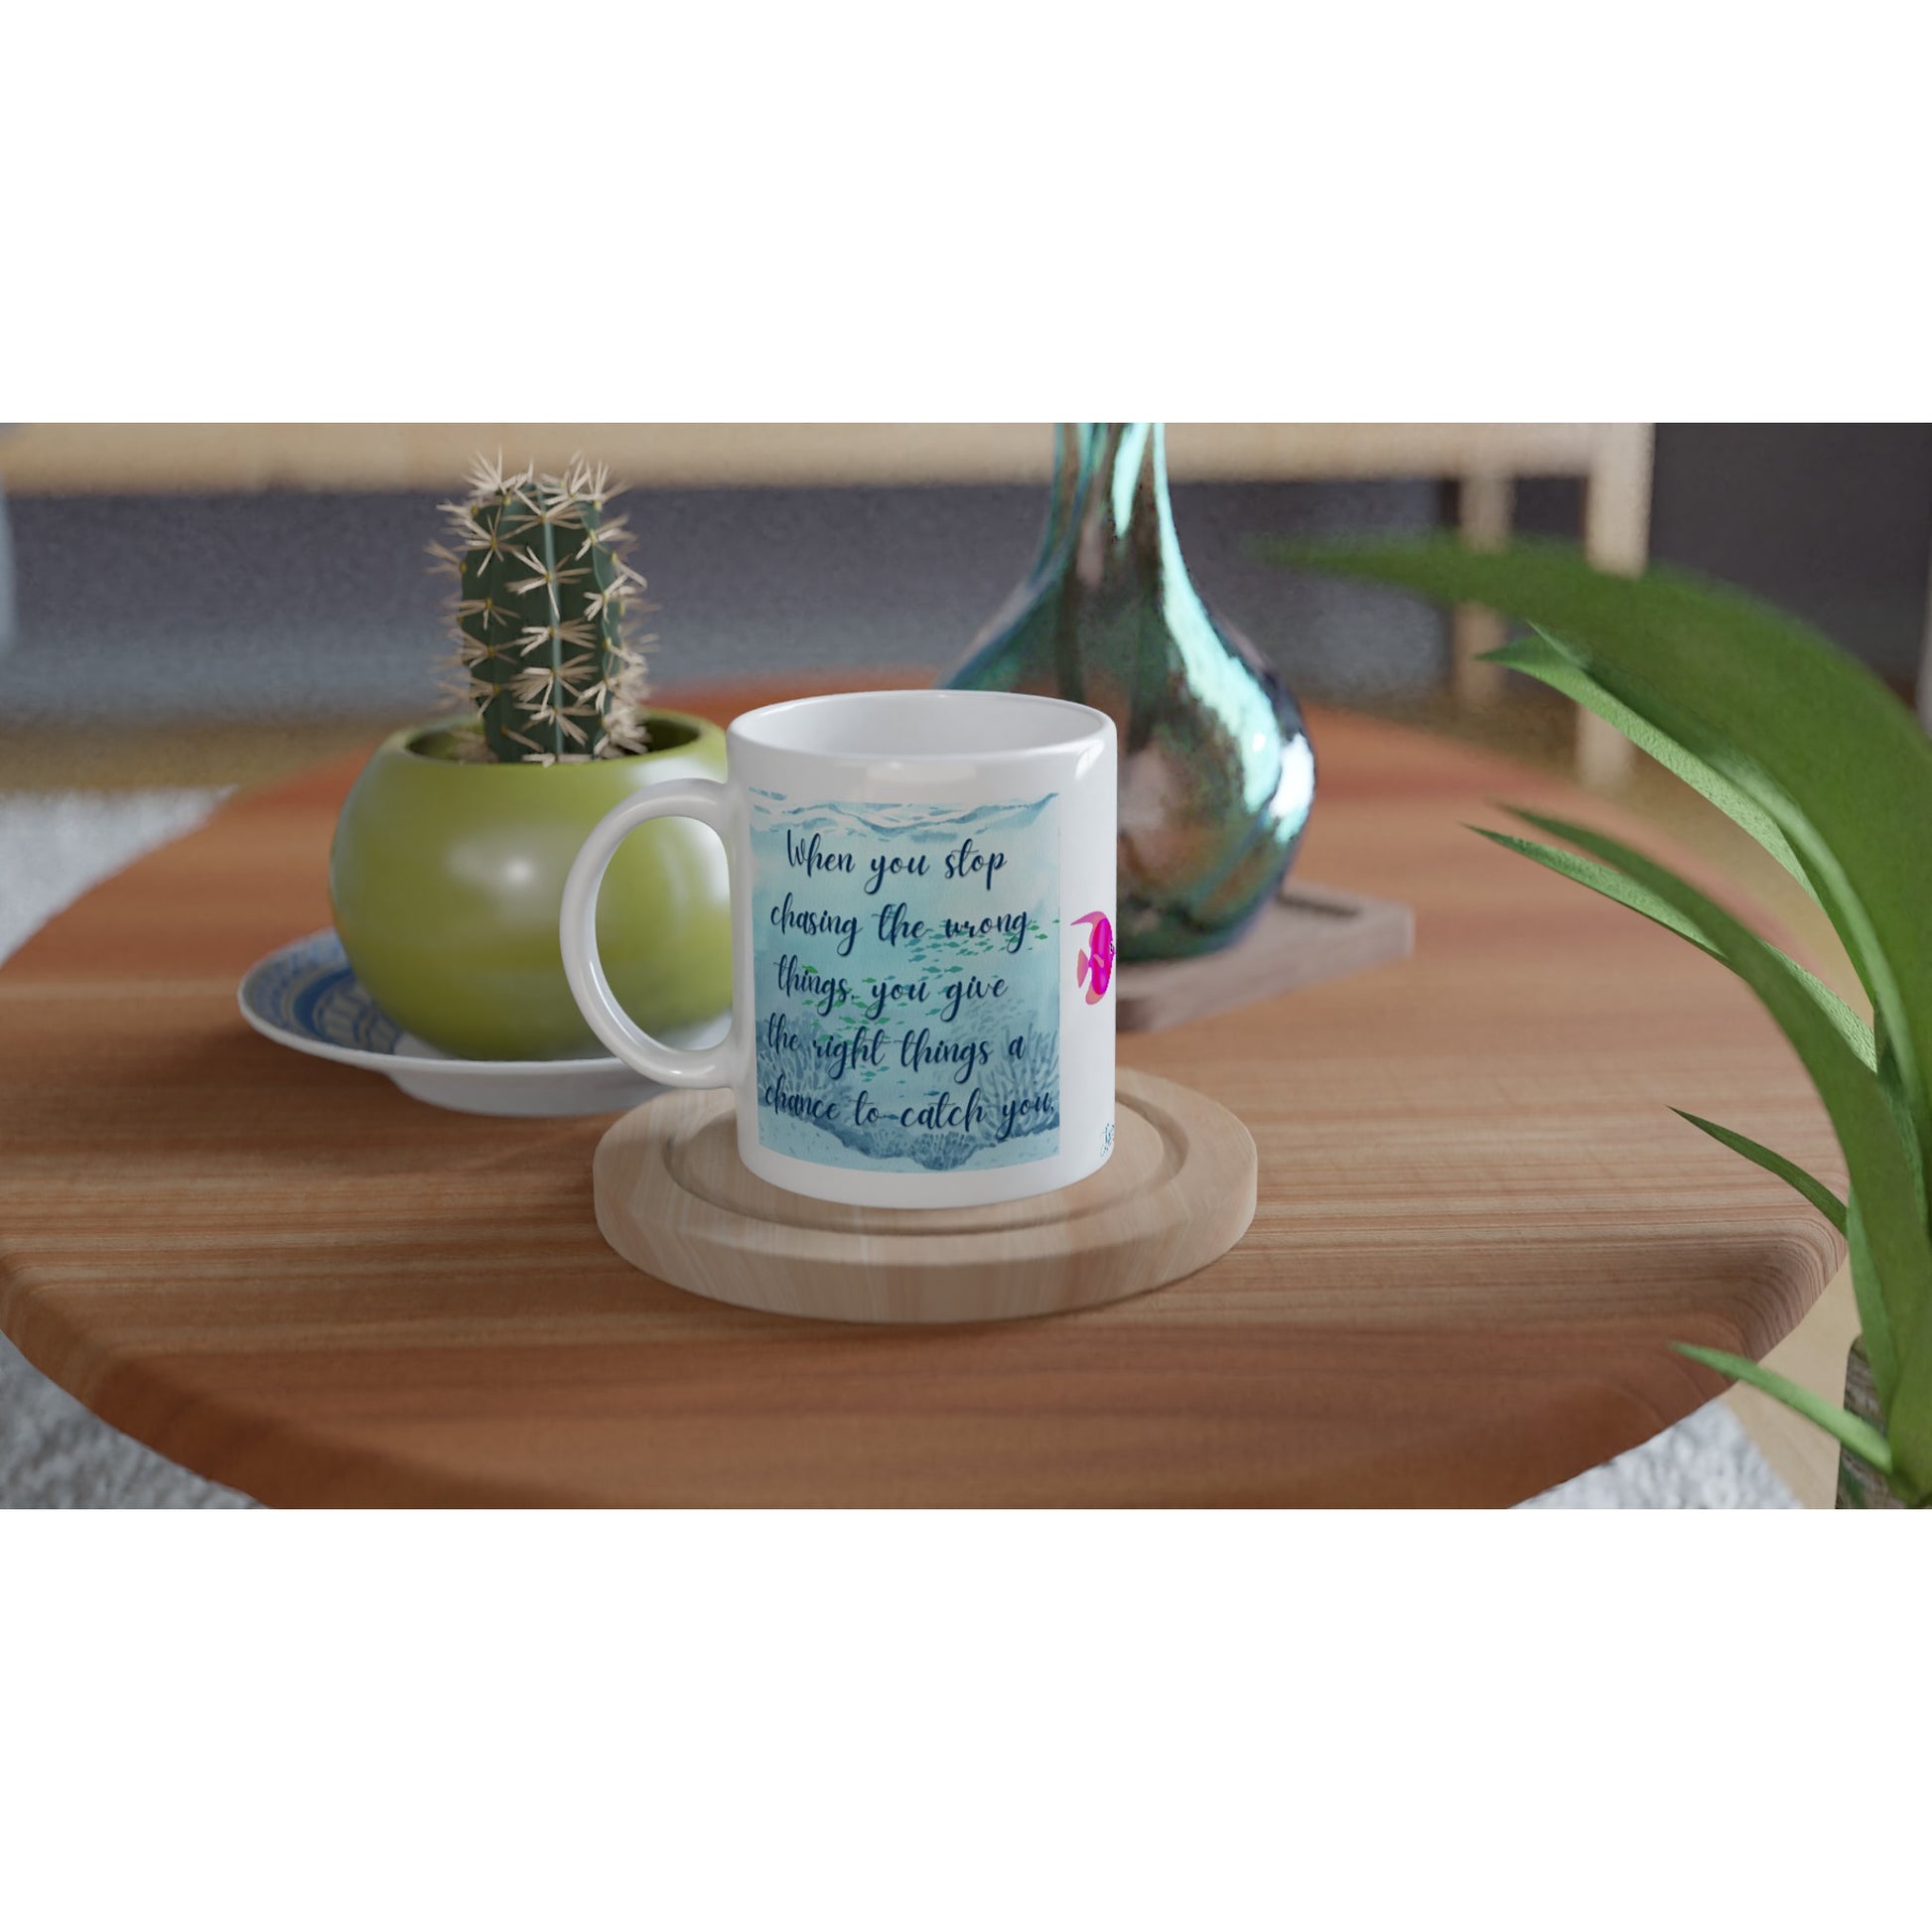 "When you stop chasing the wrong things" 11 oz. Mug on table